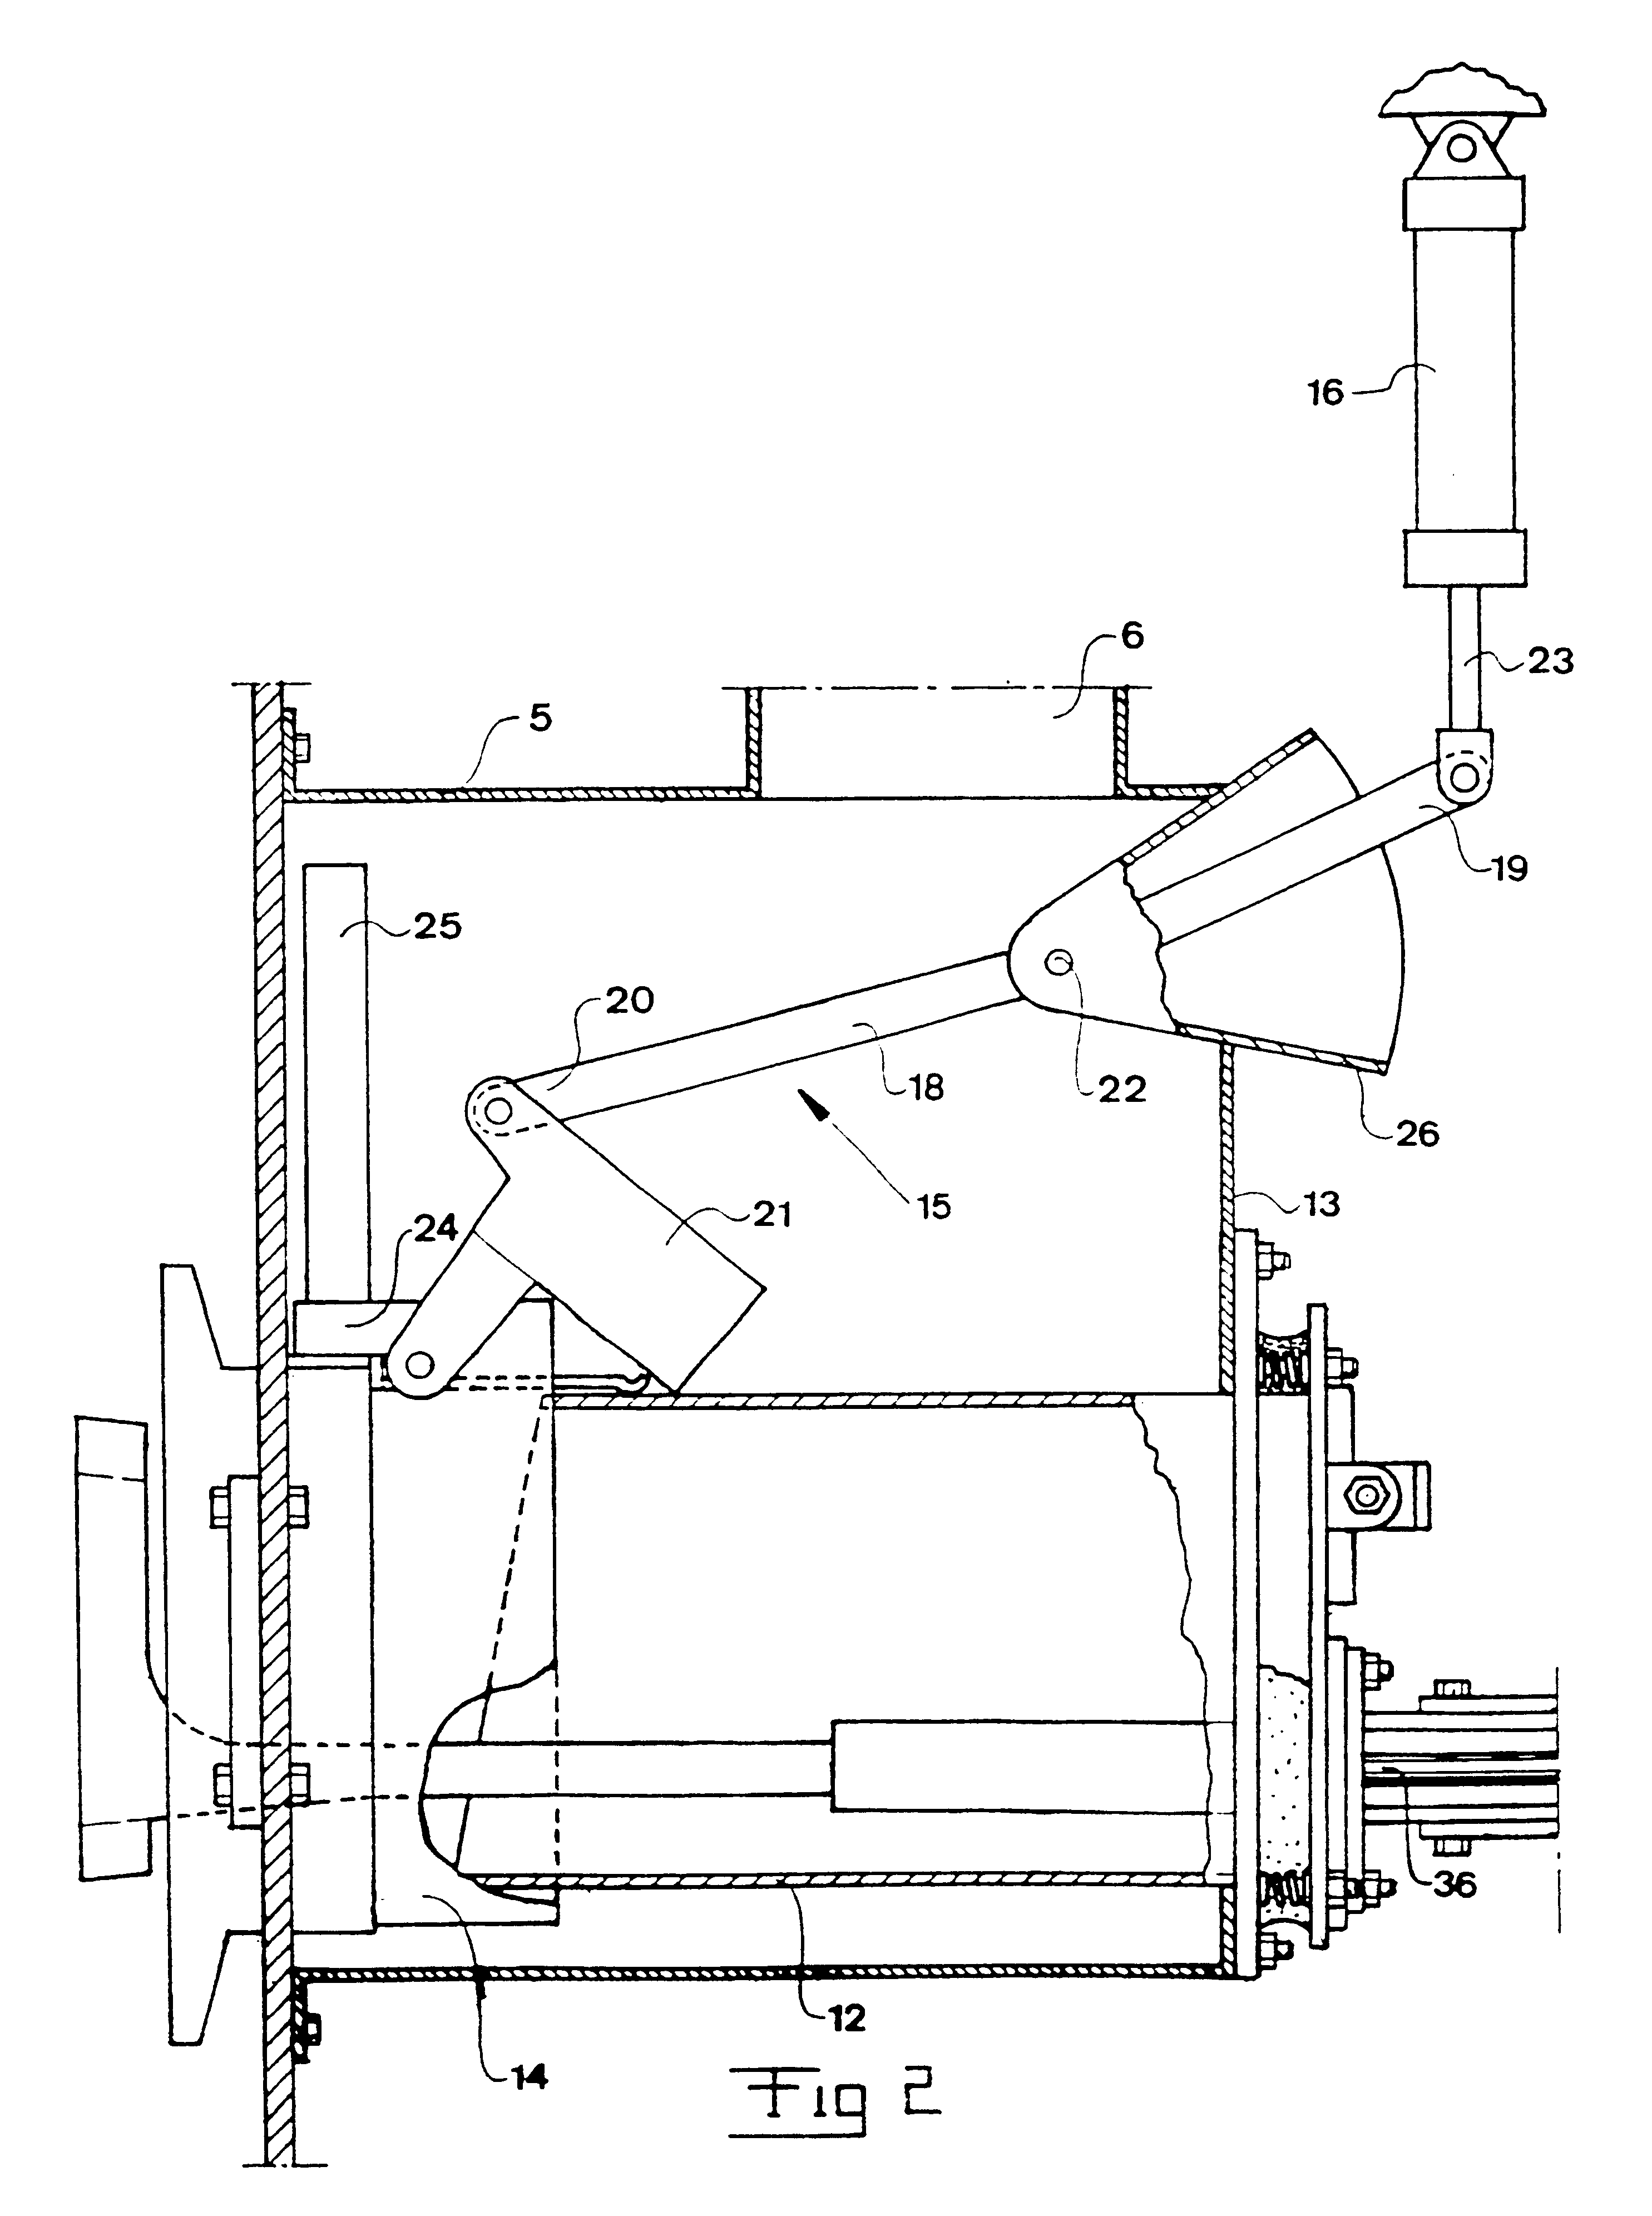 Device for regulating and cleaning an air intake